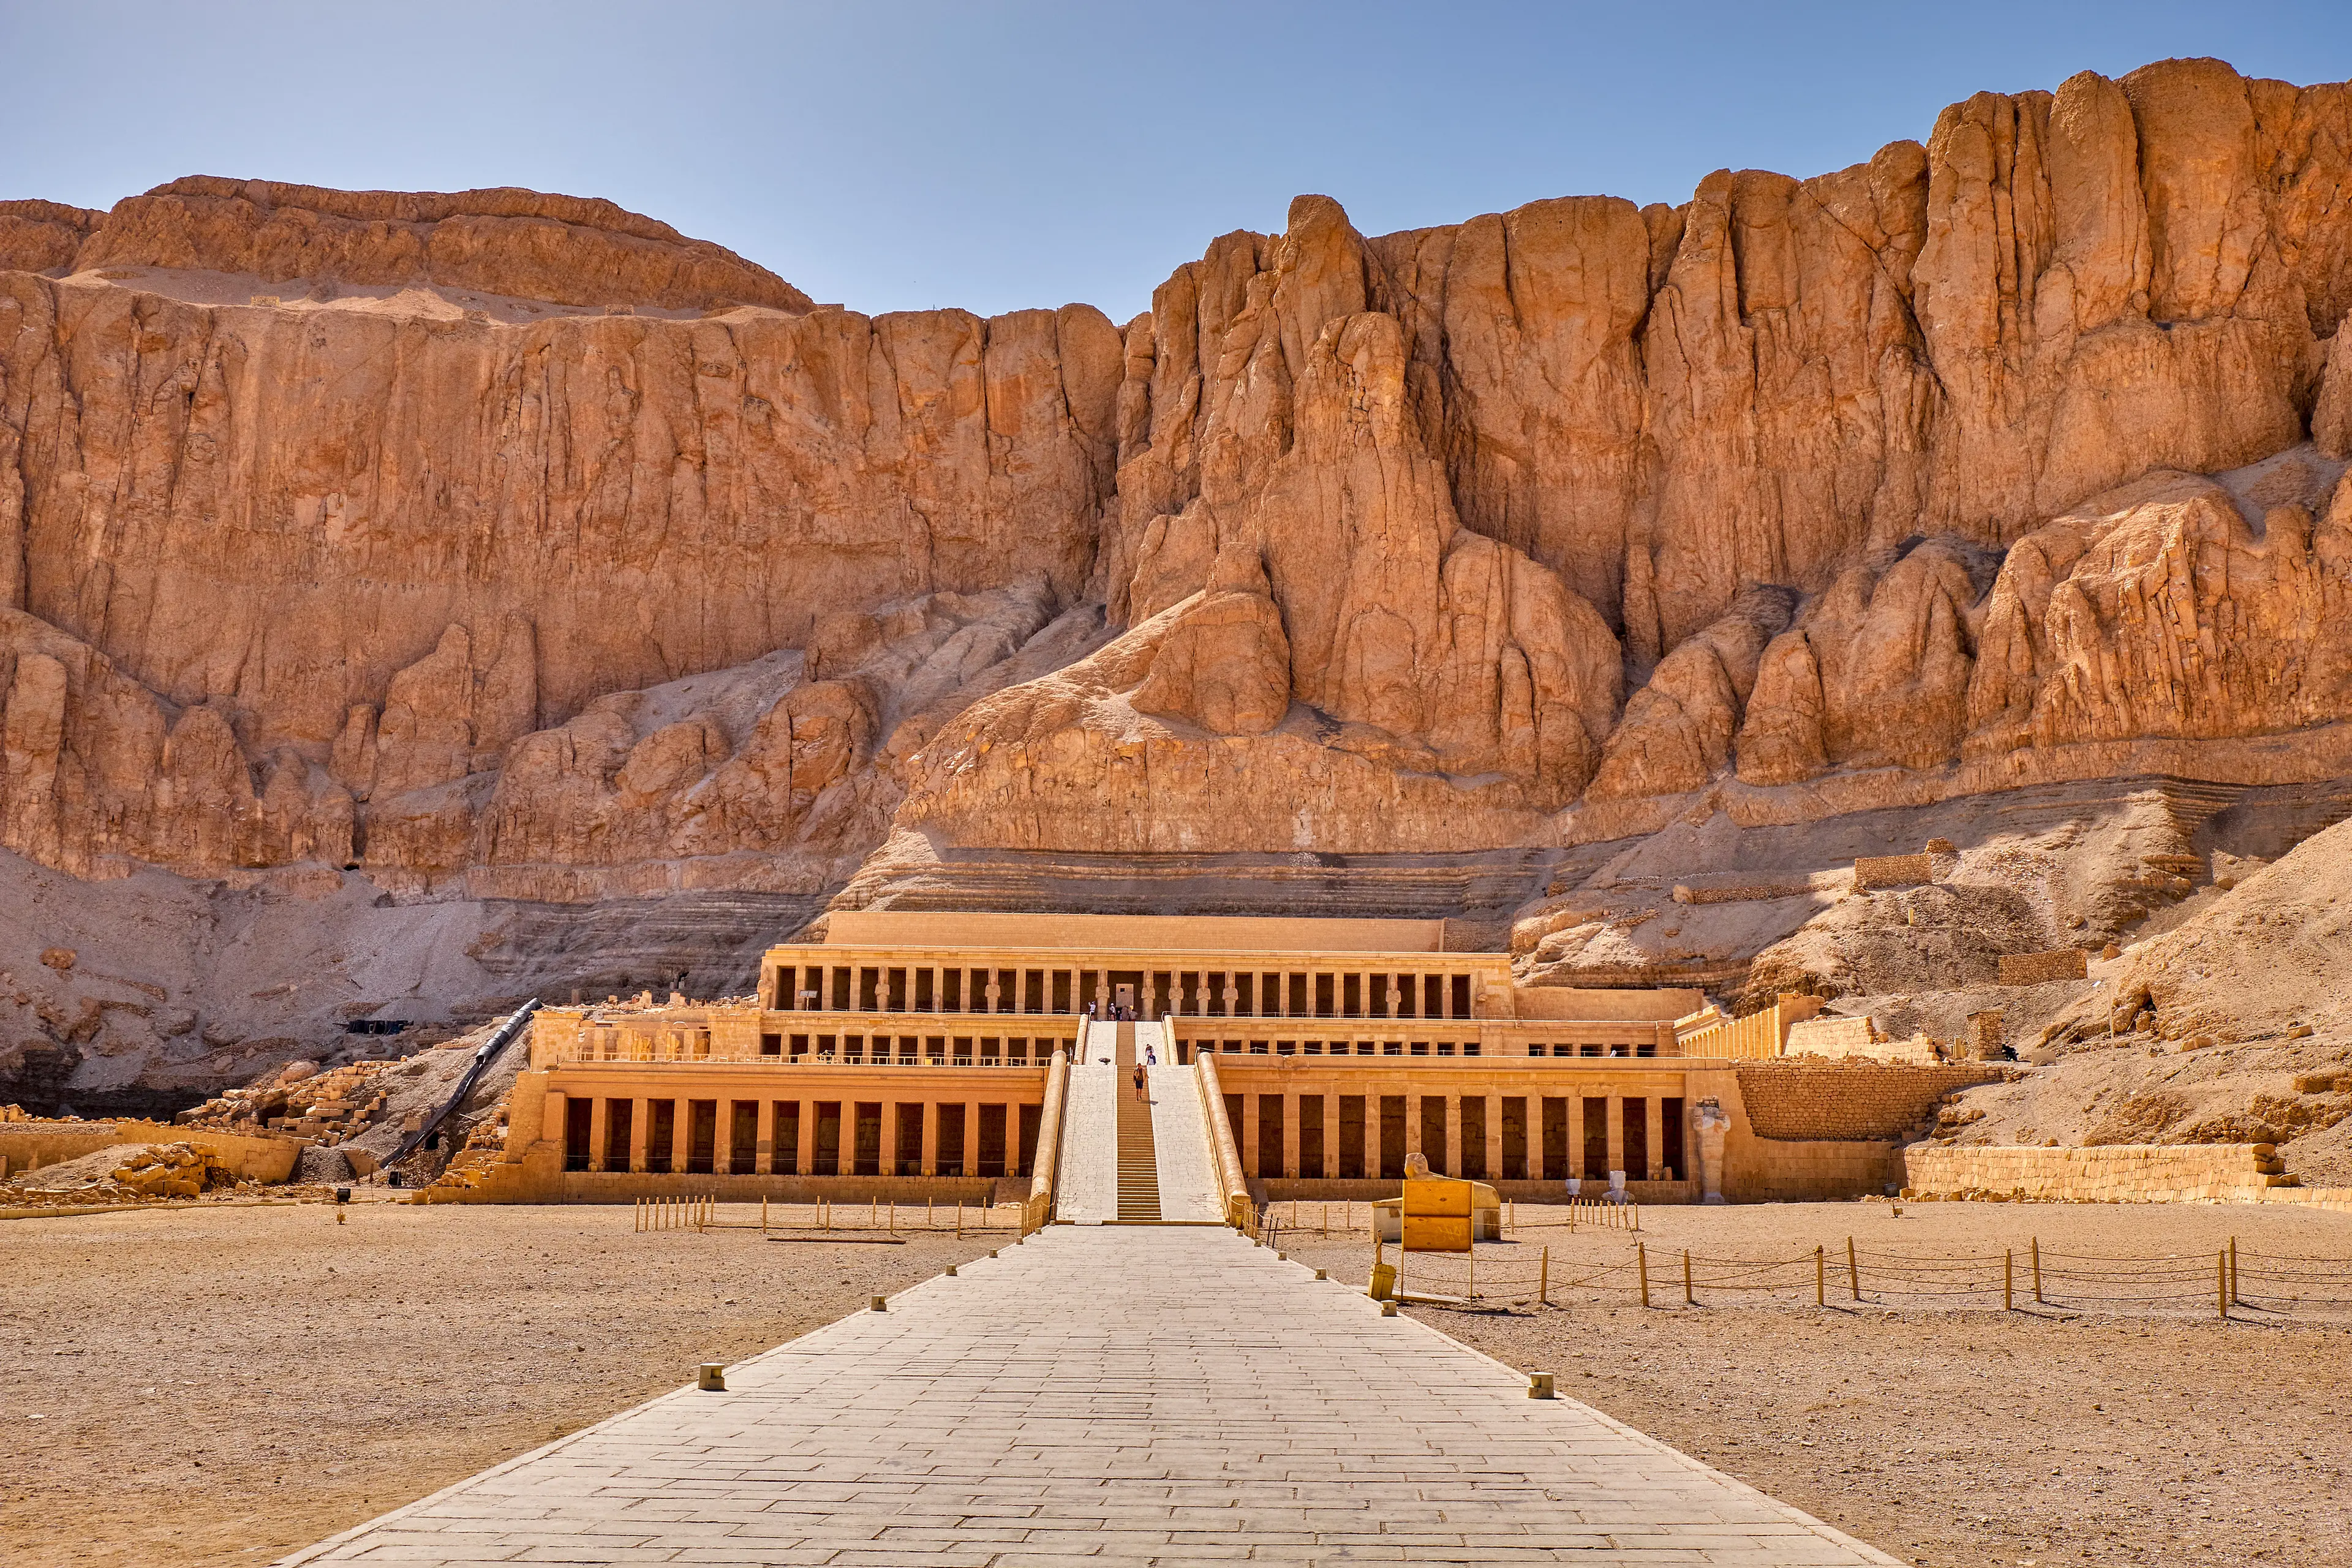 Ruins of the Mortuary temple of Hatshepsut